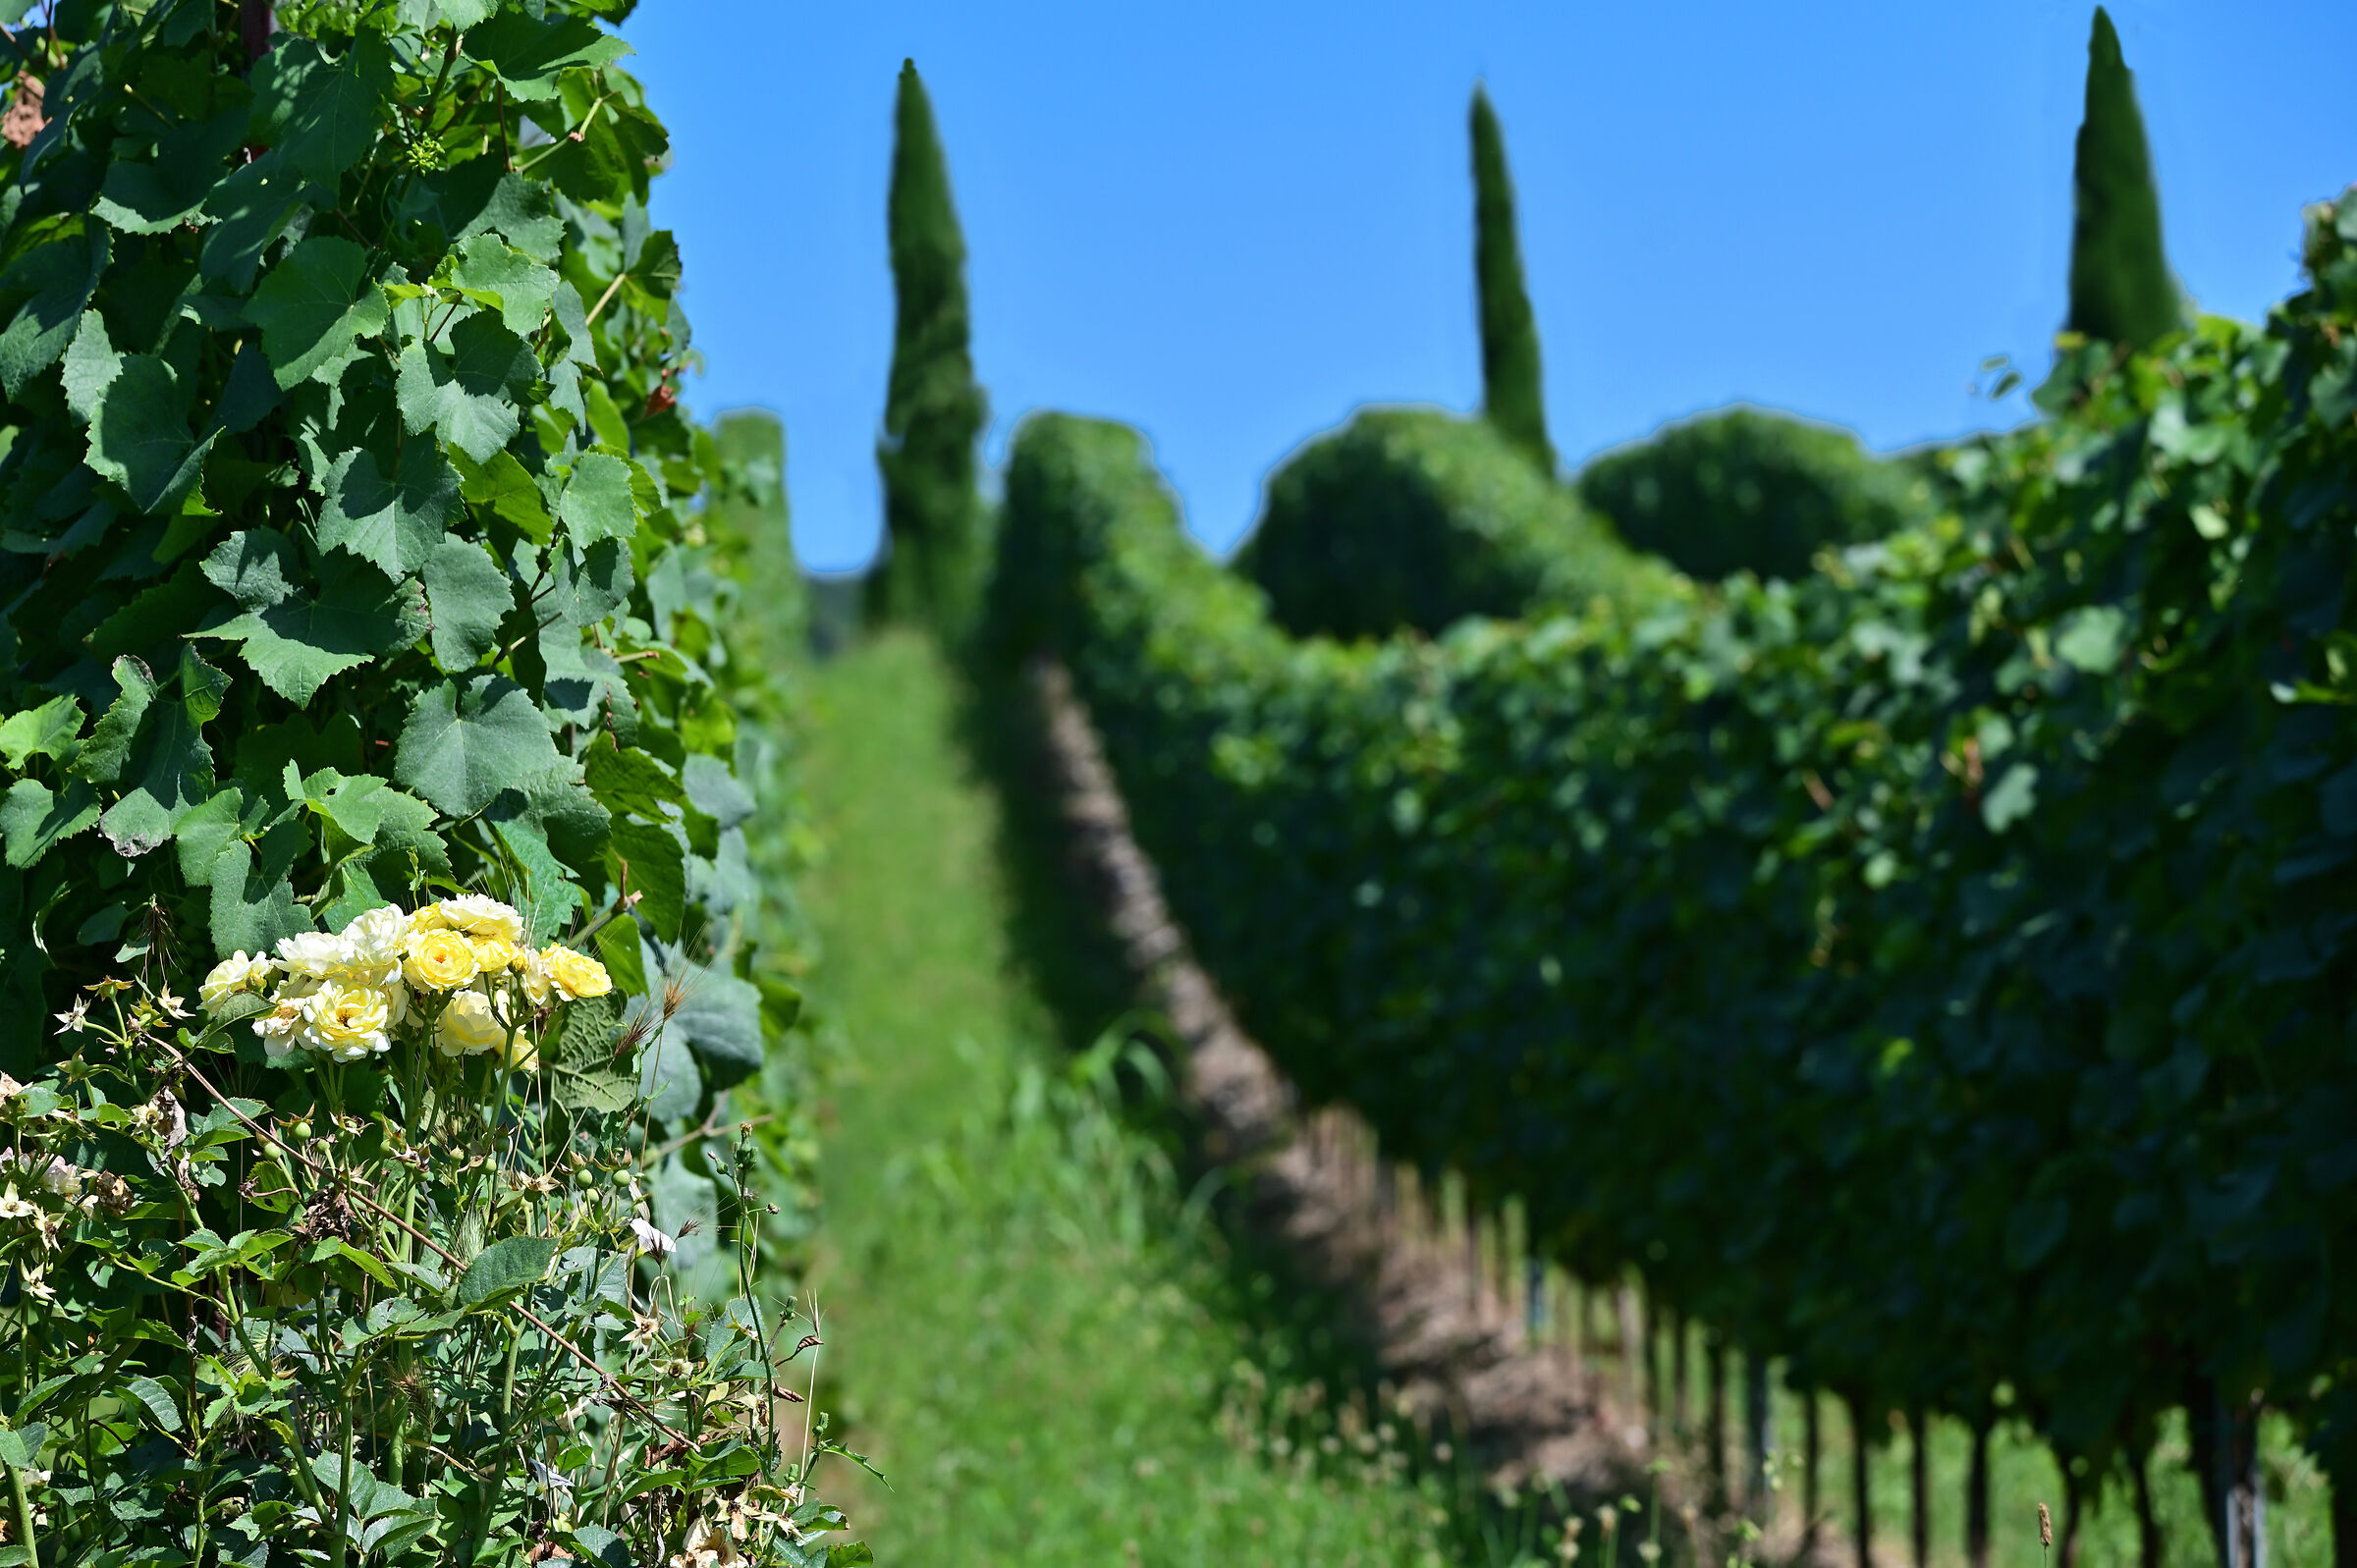 The roses in the vineyard....